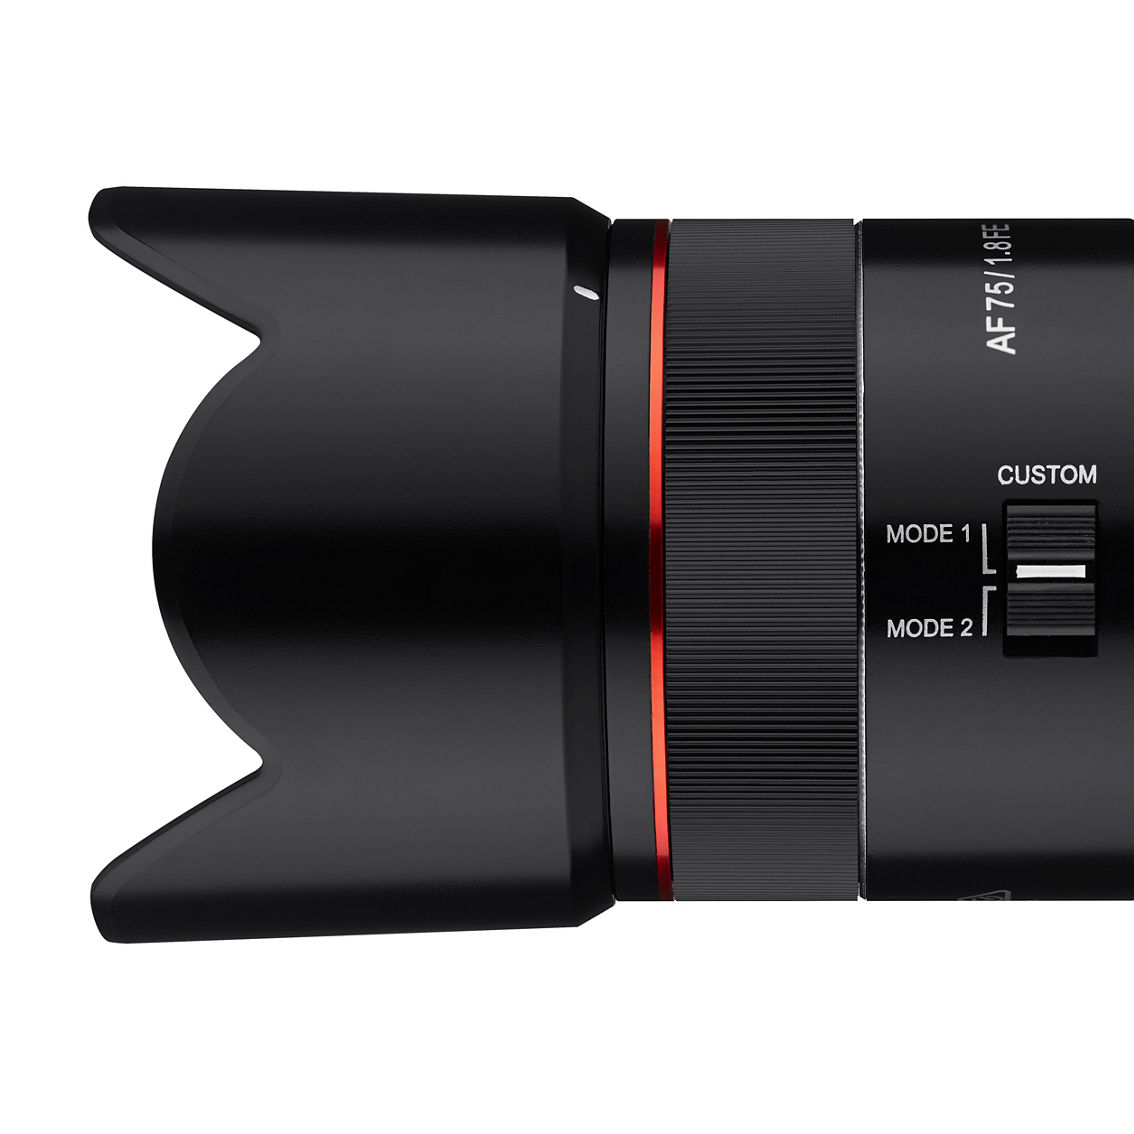 Rokinon 75mm F1.8 AF Compact Telephoto Lens for Sony E Mount - Image 3 of 5